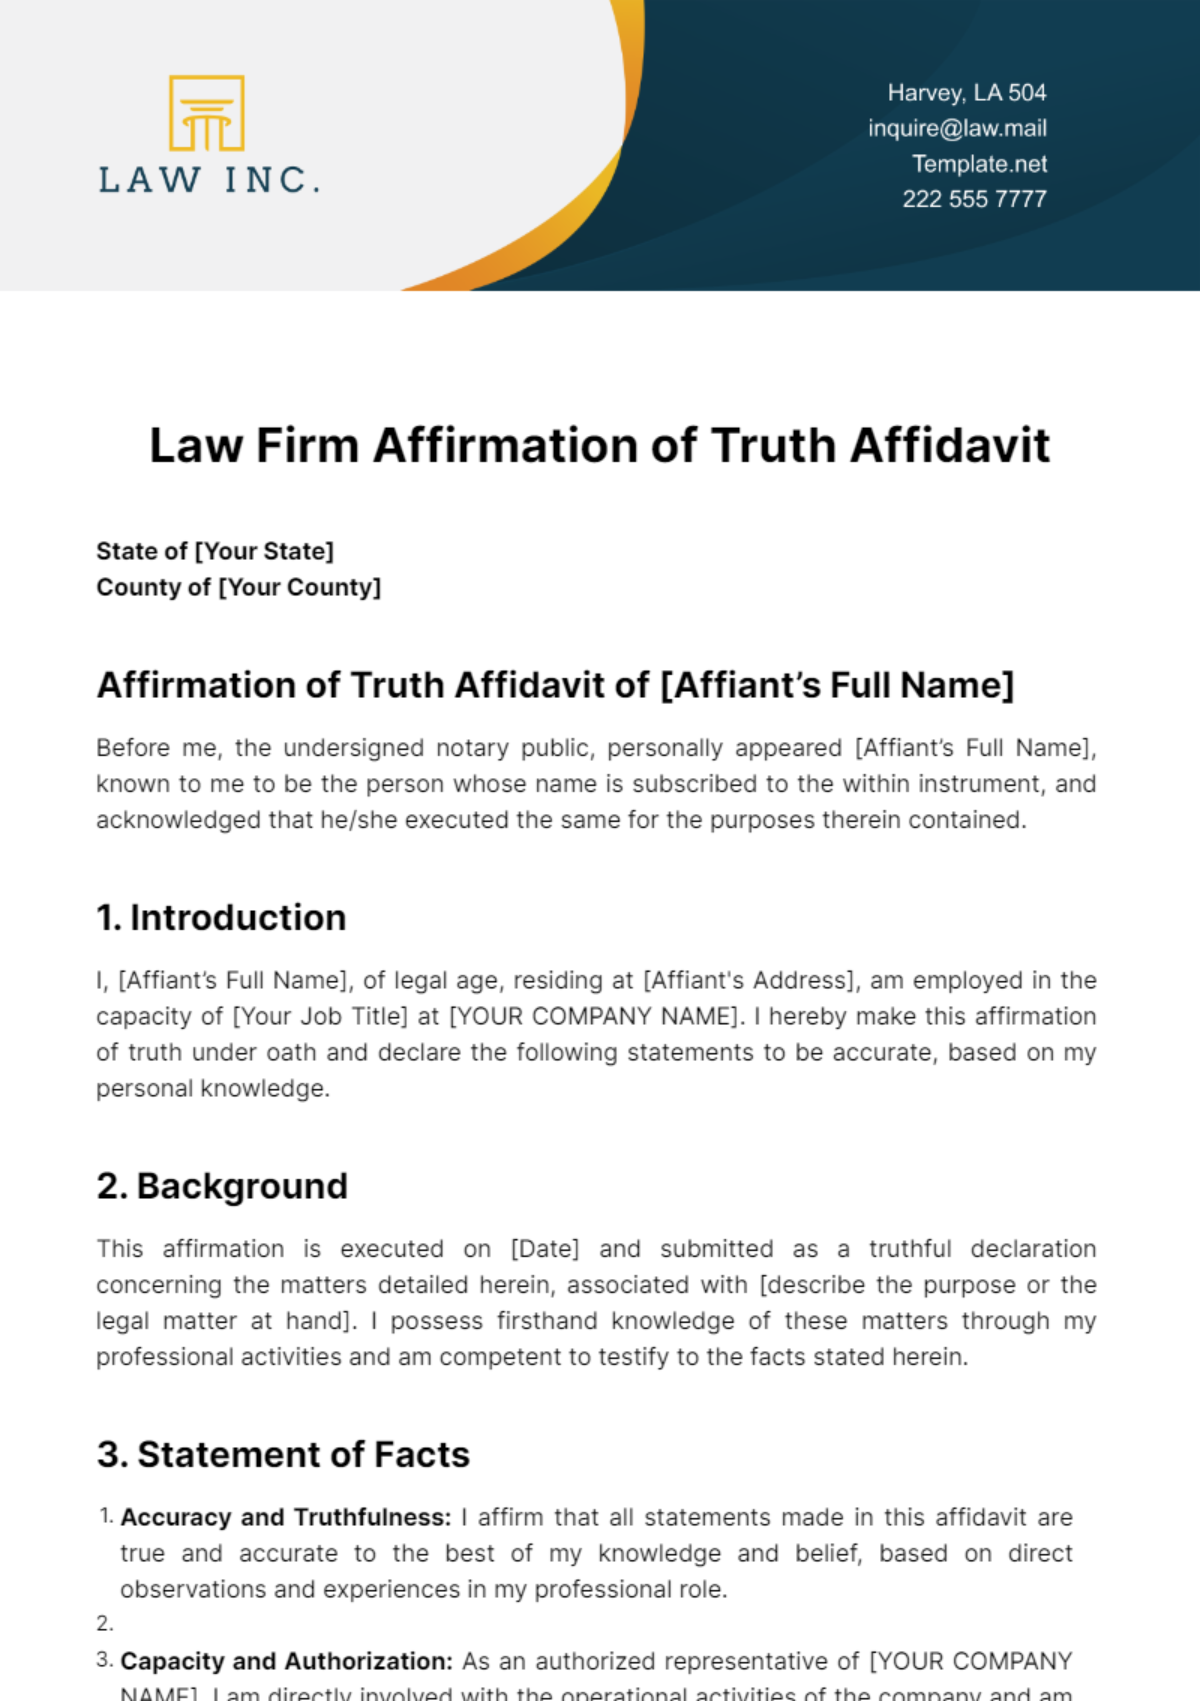 Free Law Firm Affirmation of Truth Affidavit Template